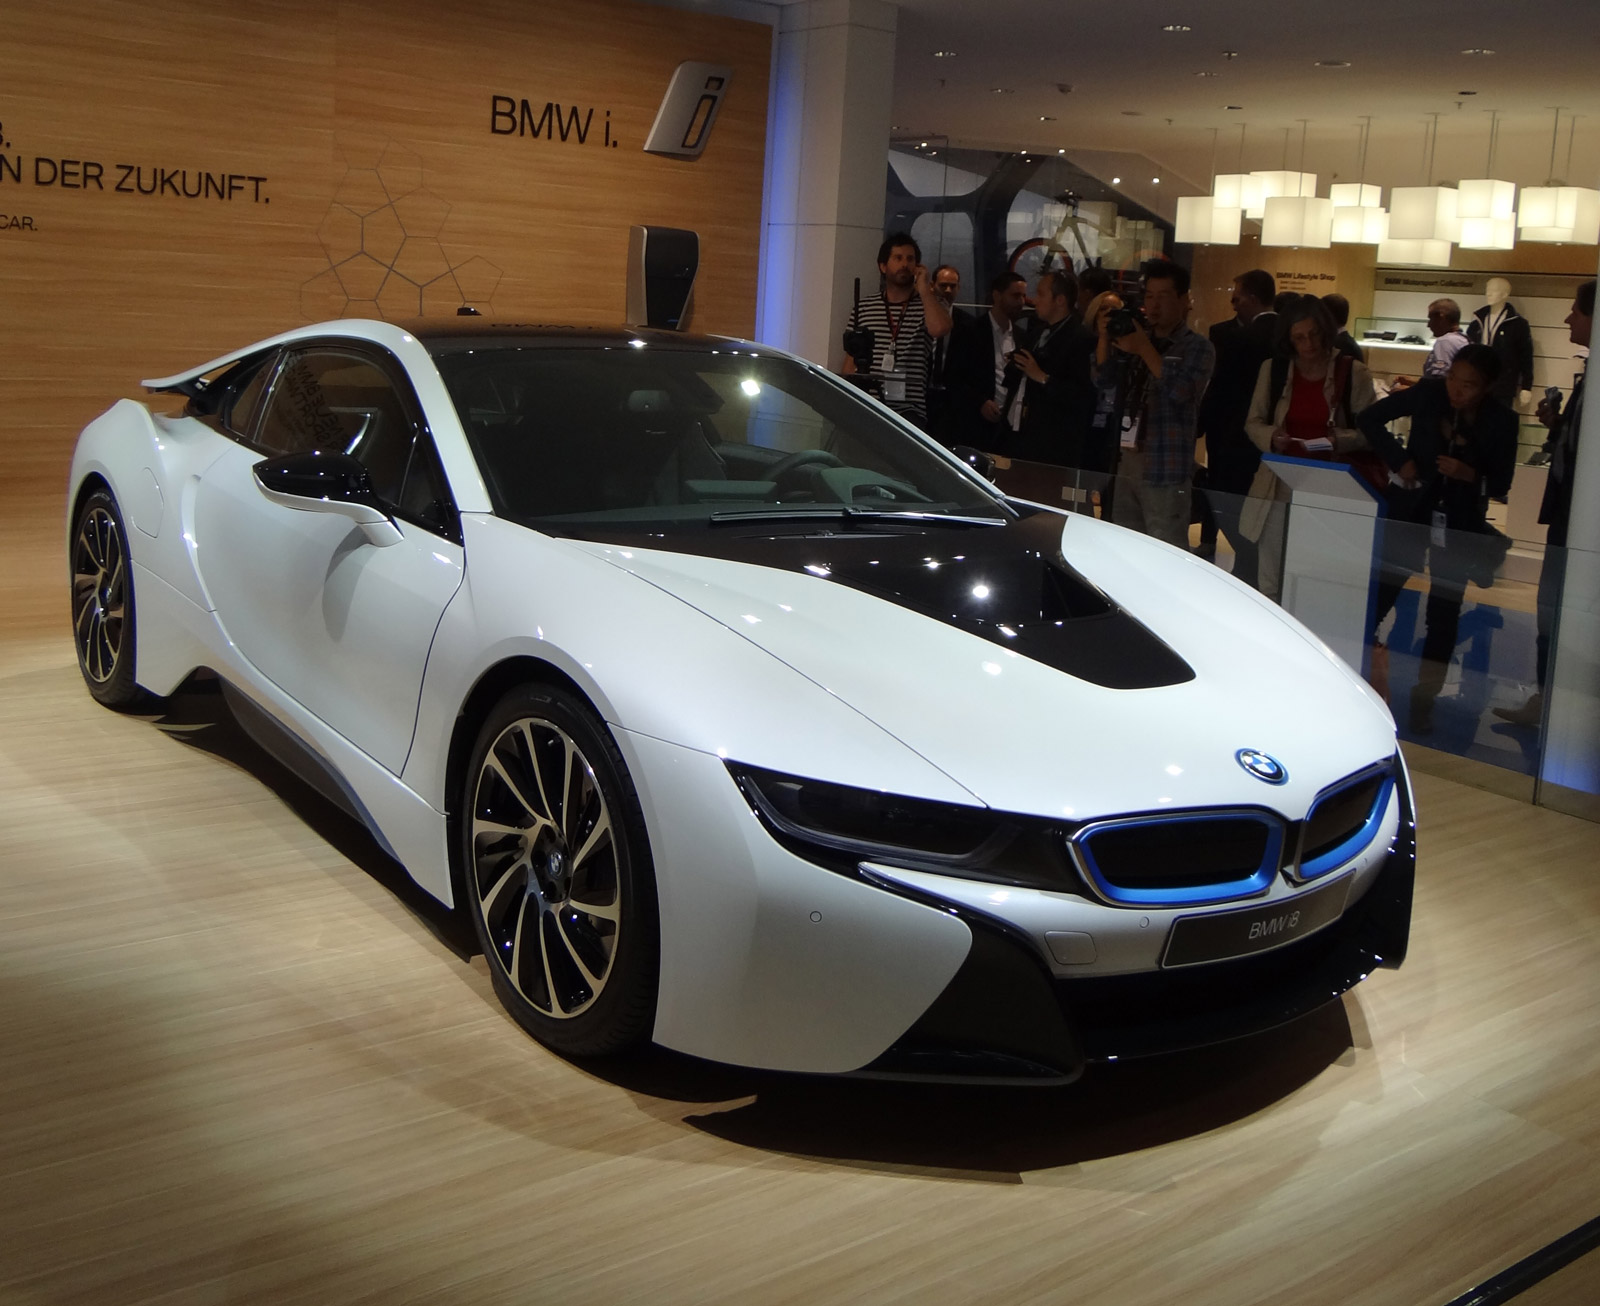 Louis Vuitton launches made-to-measure luggage for BMW's i8 sports car